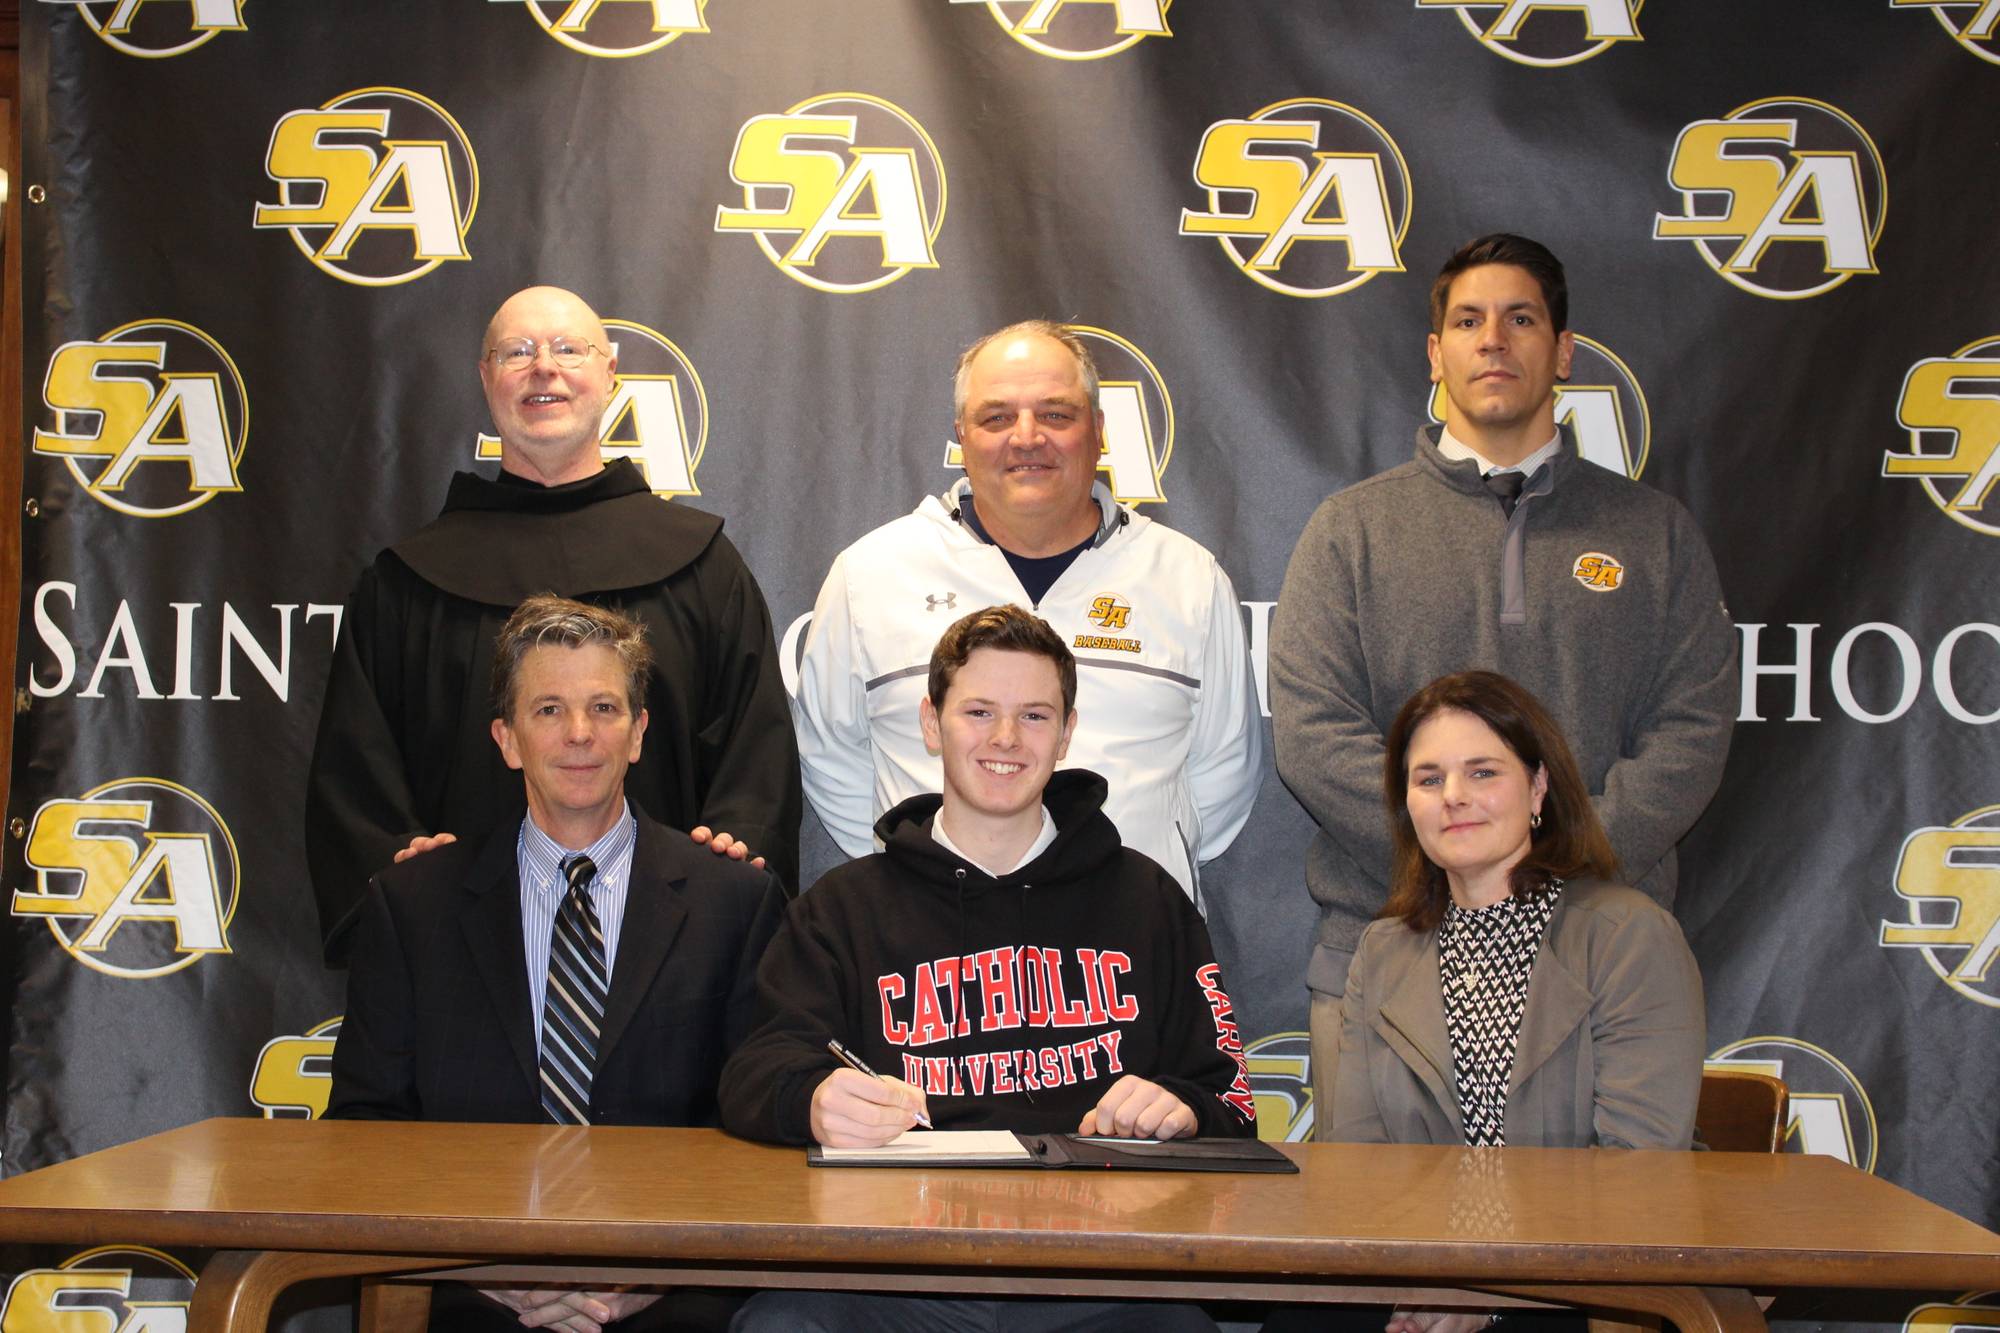 Congratulations Coline Kehoe; committed to Catholic University to play Baseball